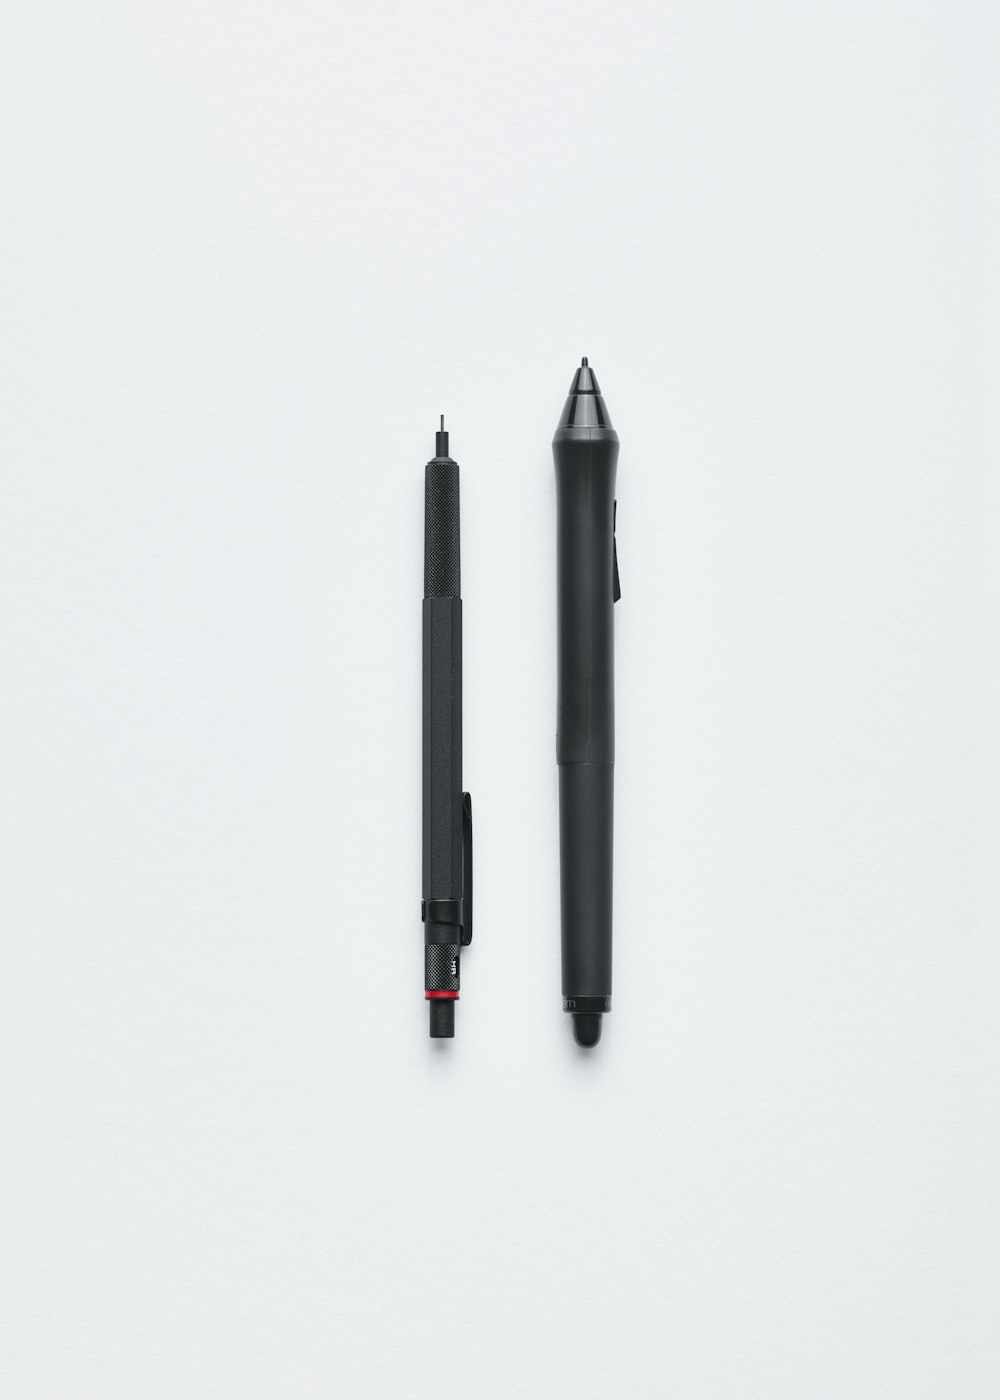 A mechanical pencil and a pen.